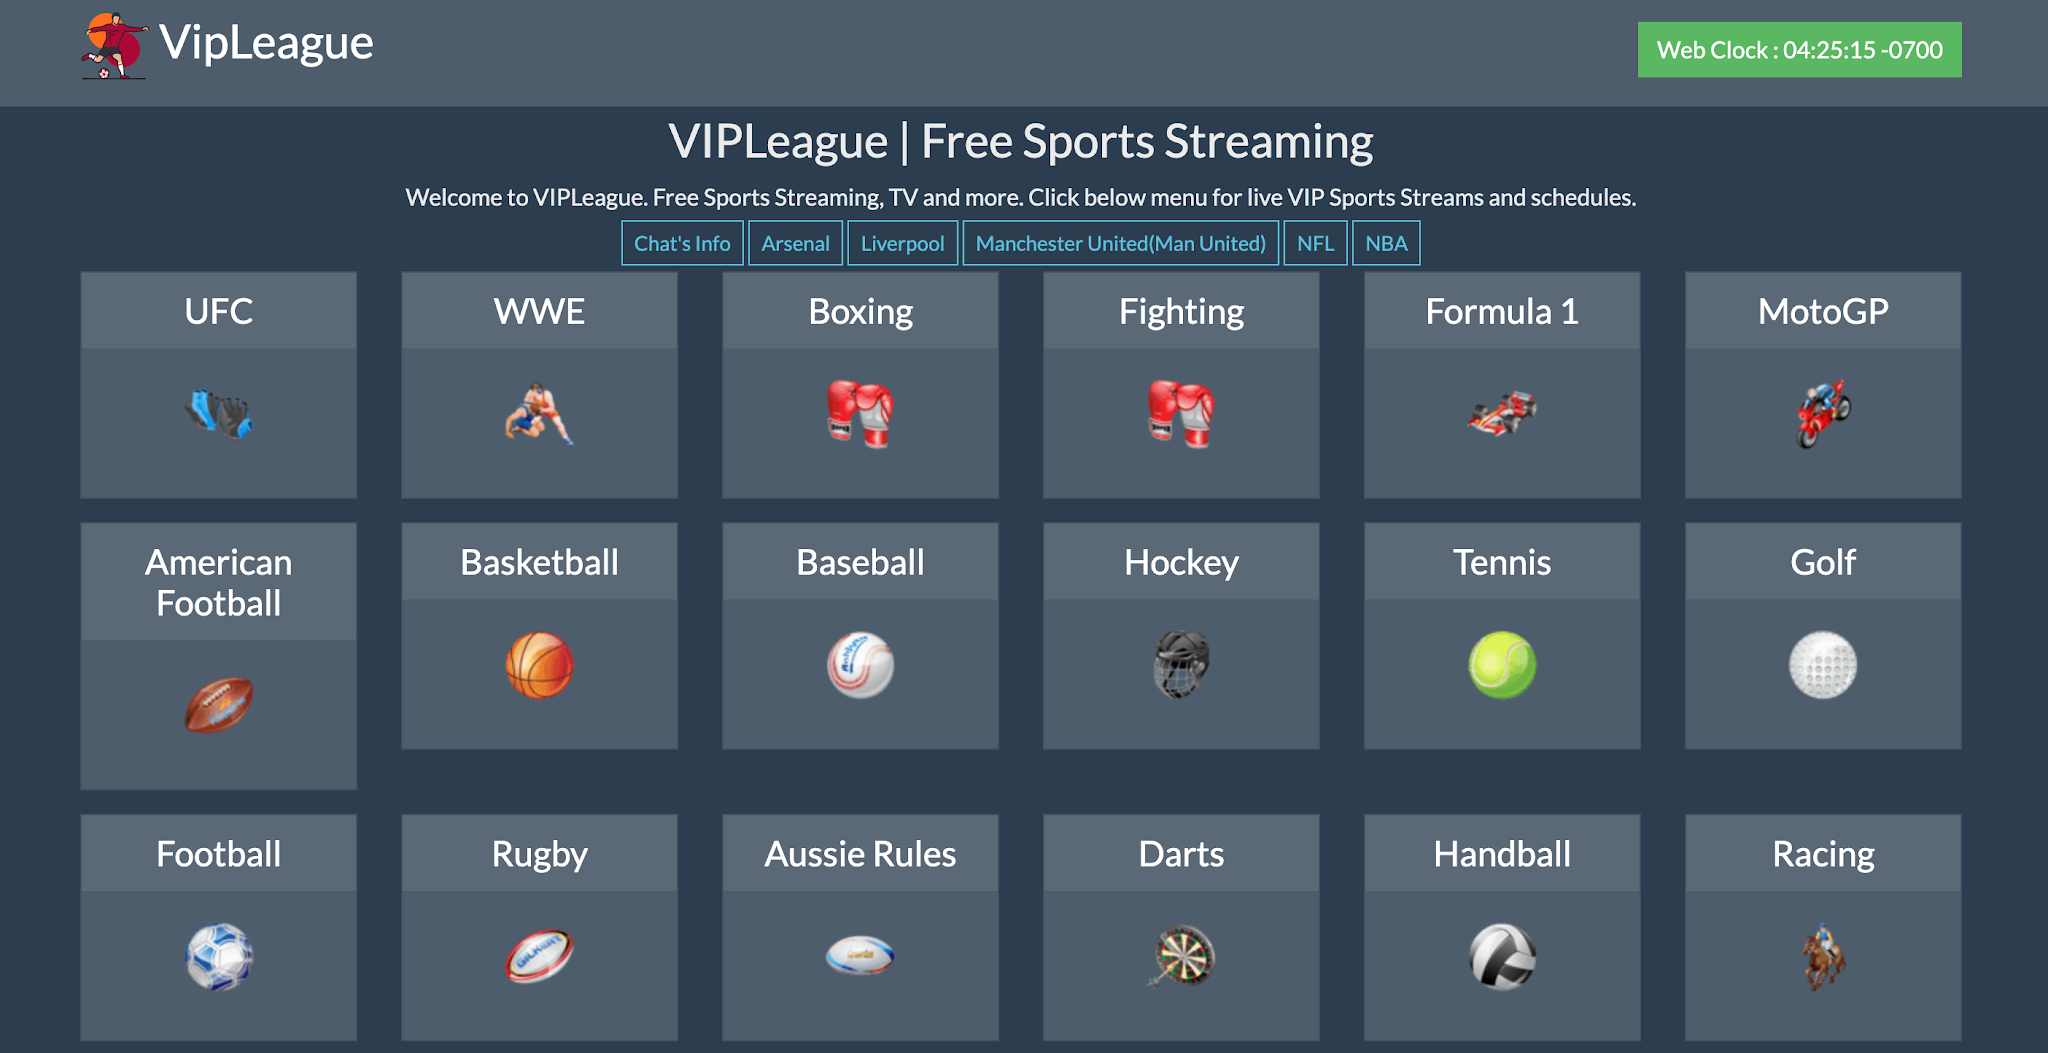 VIPLeague - Free Sports Streaming